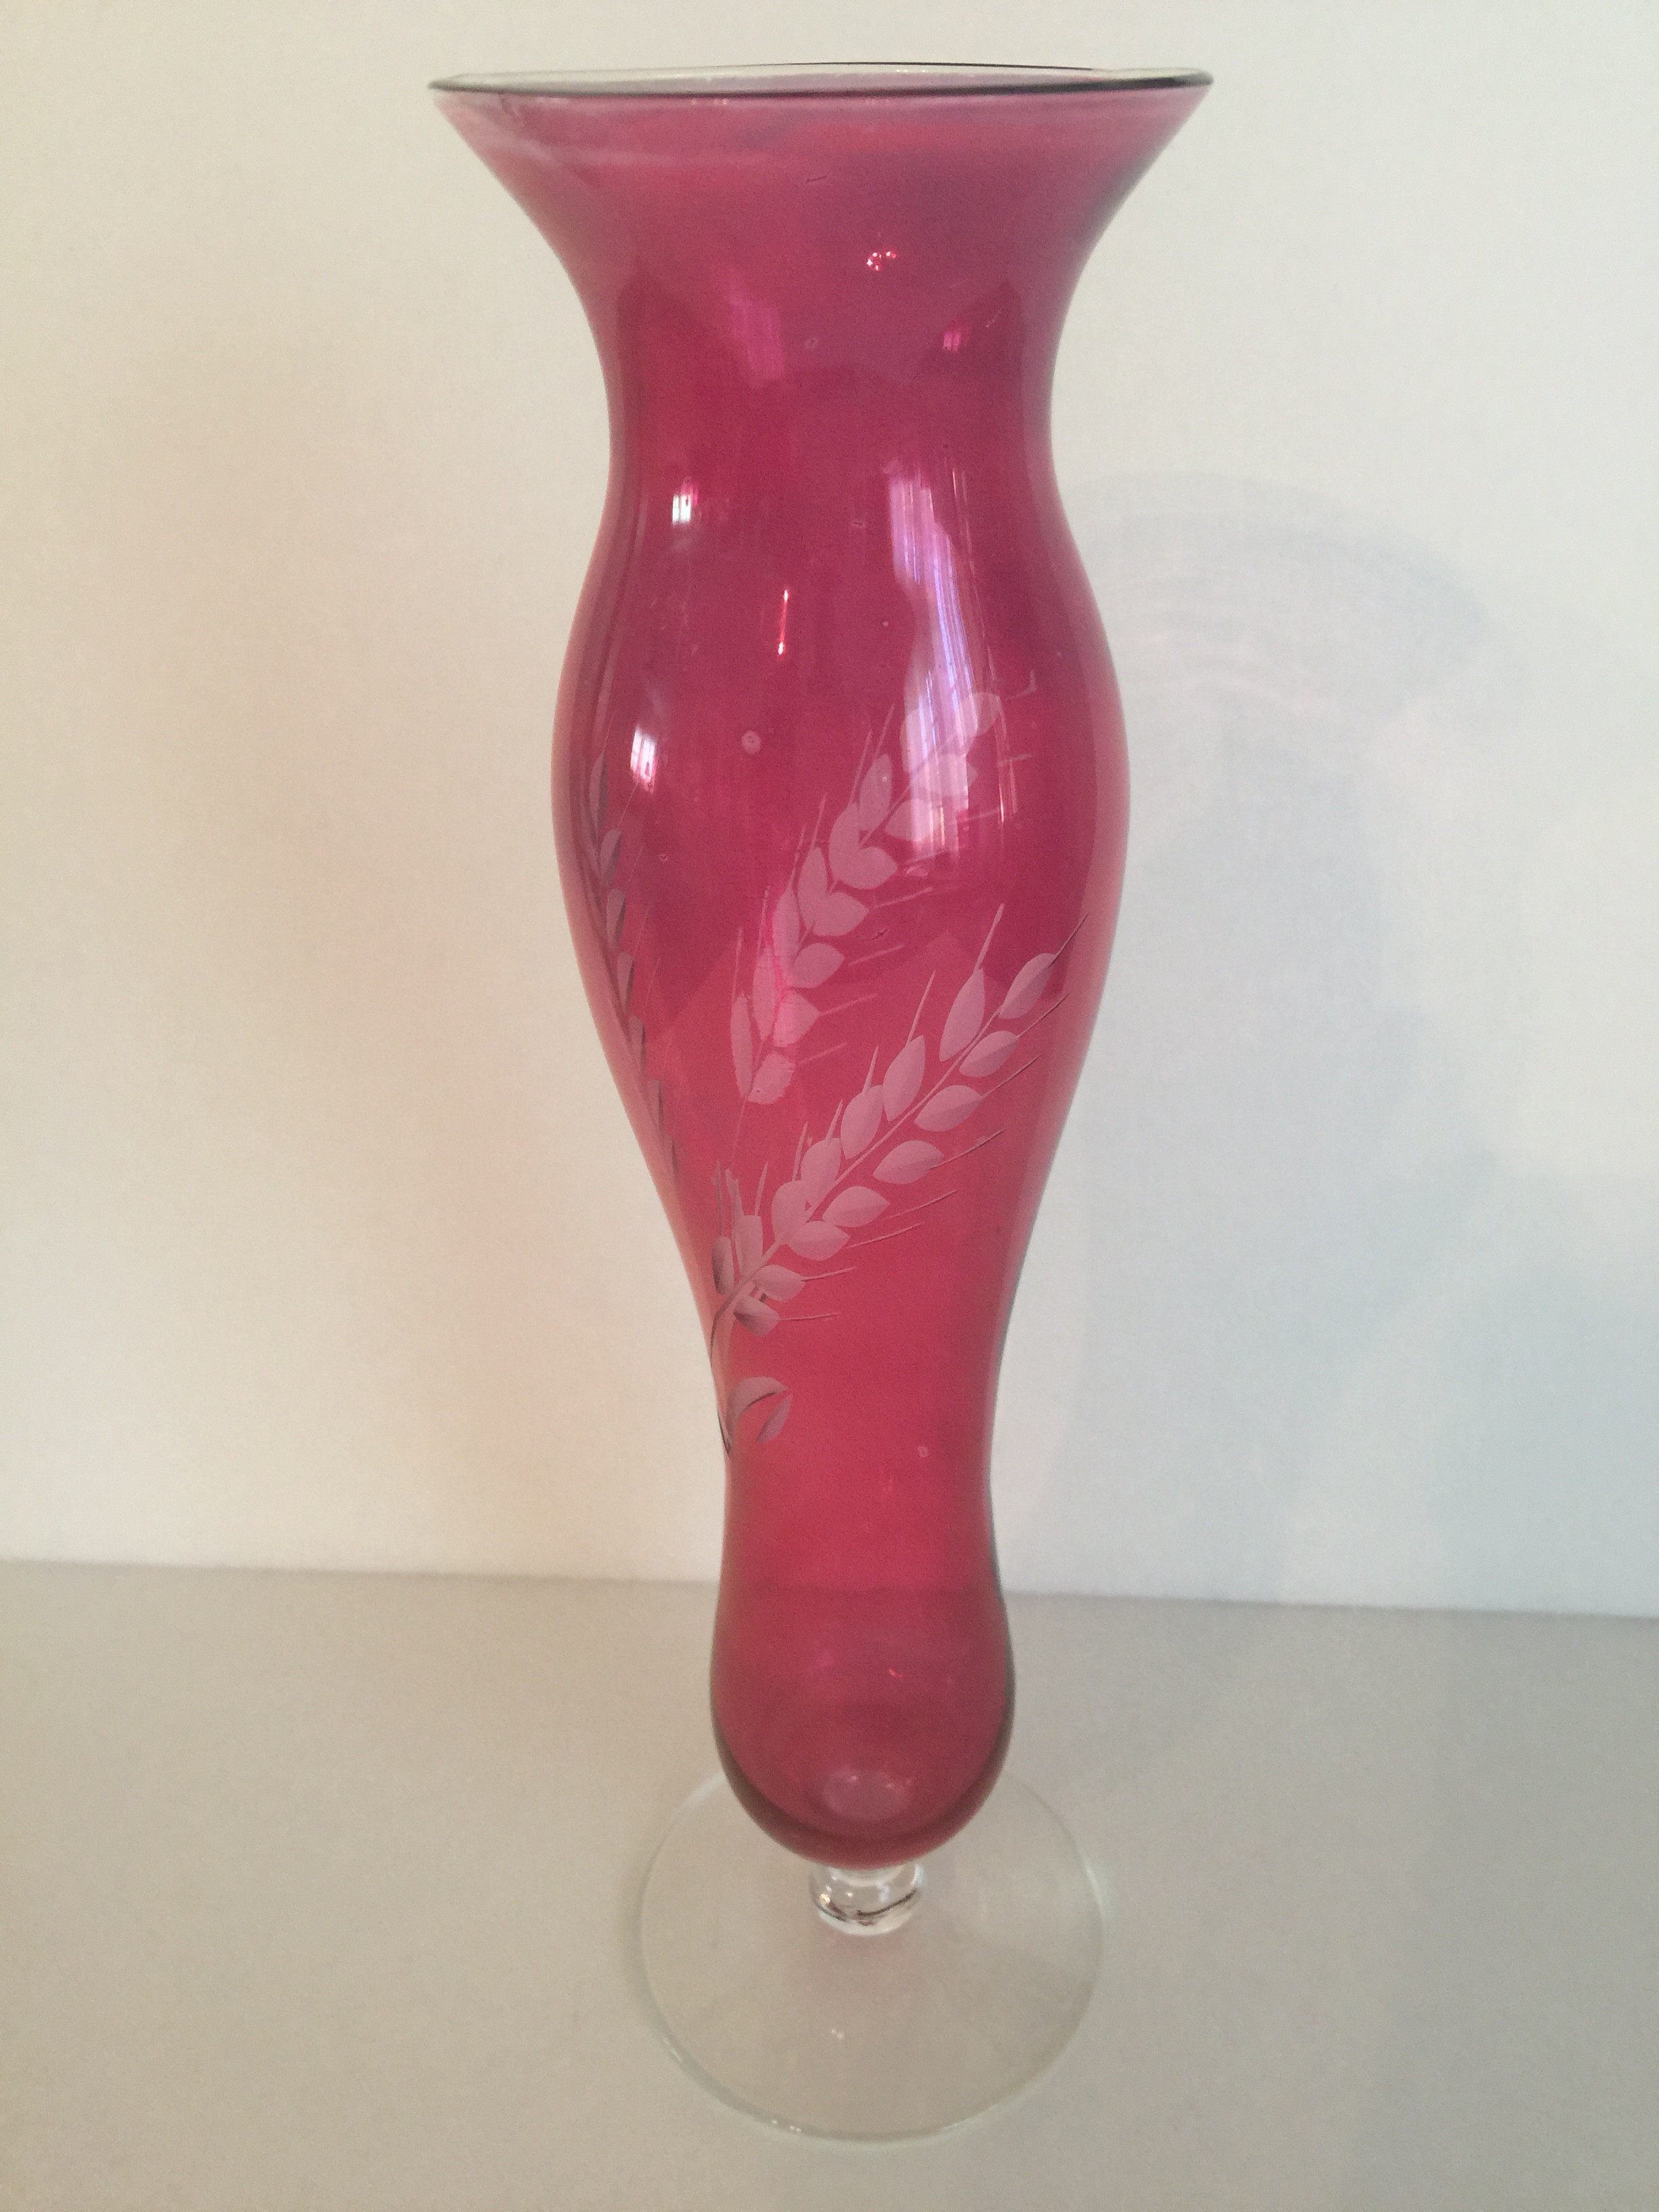 van briggle calla lily vase of marys glass collection intended for wheat vase jpg